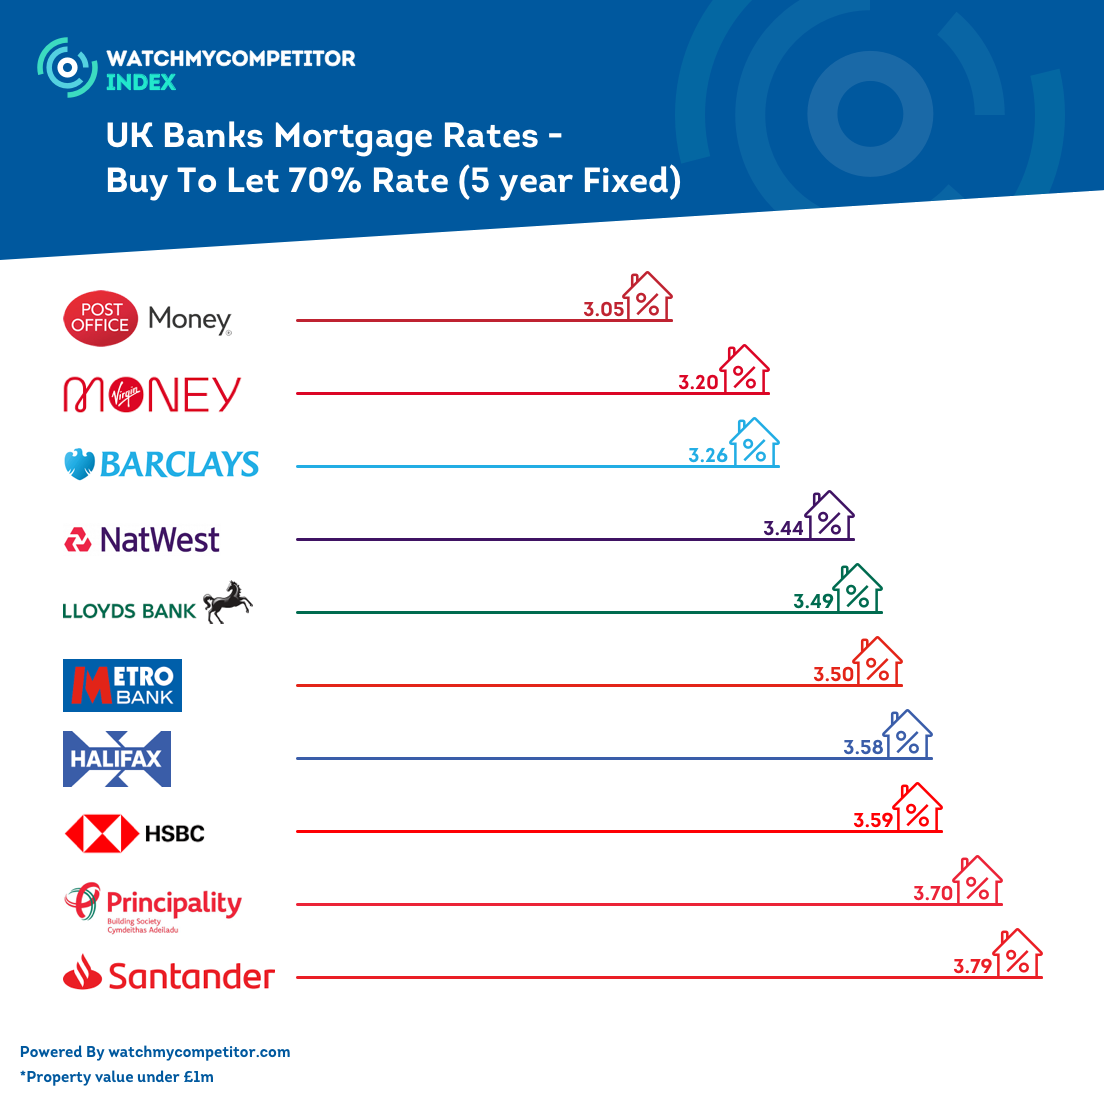 K-Banks-Mortgage-Rates-Buy-To-Let-70_-Rate-5-year-Fixed